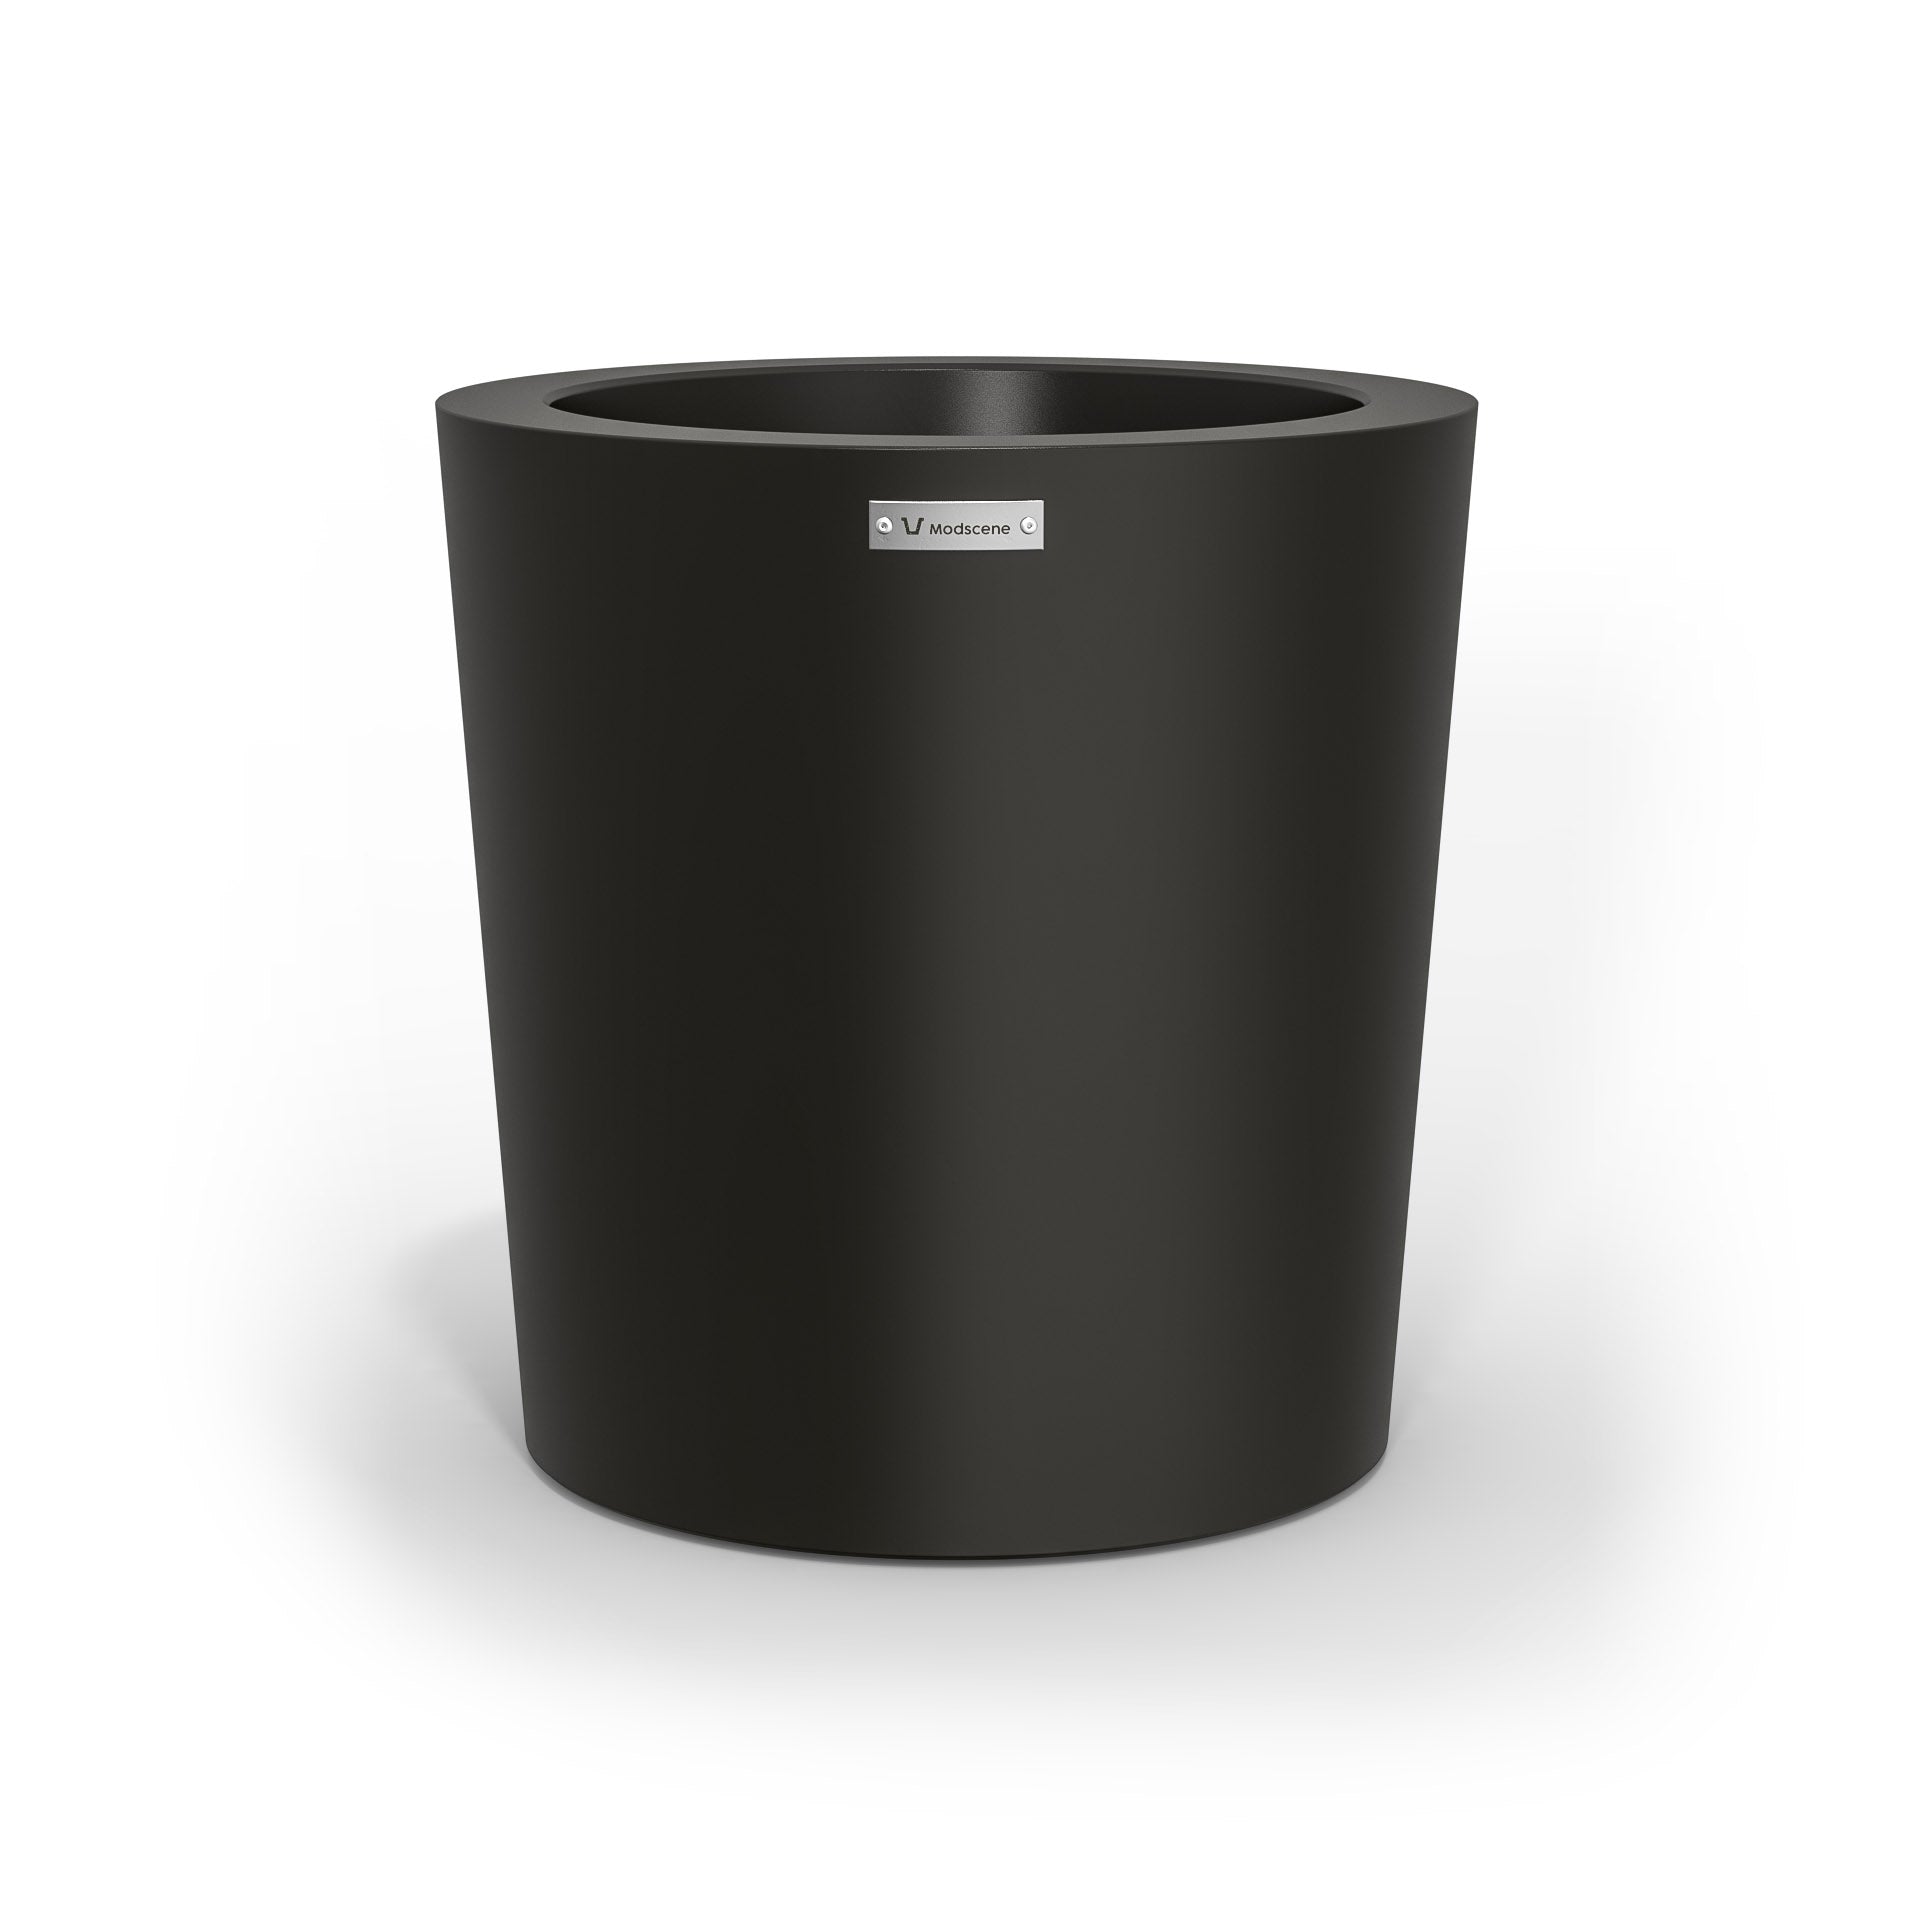 A small black planter pot made by Modscene New Zealand.